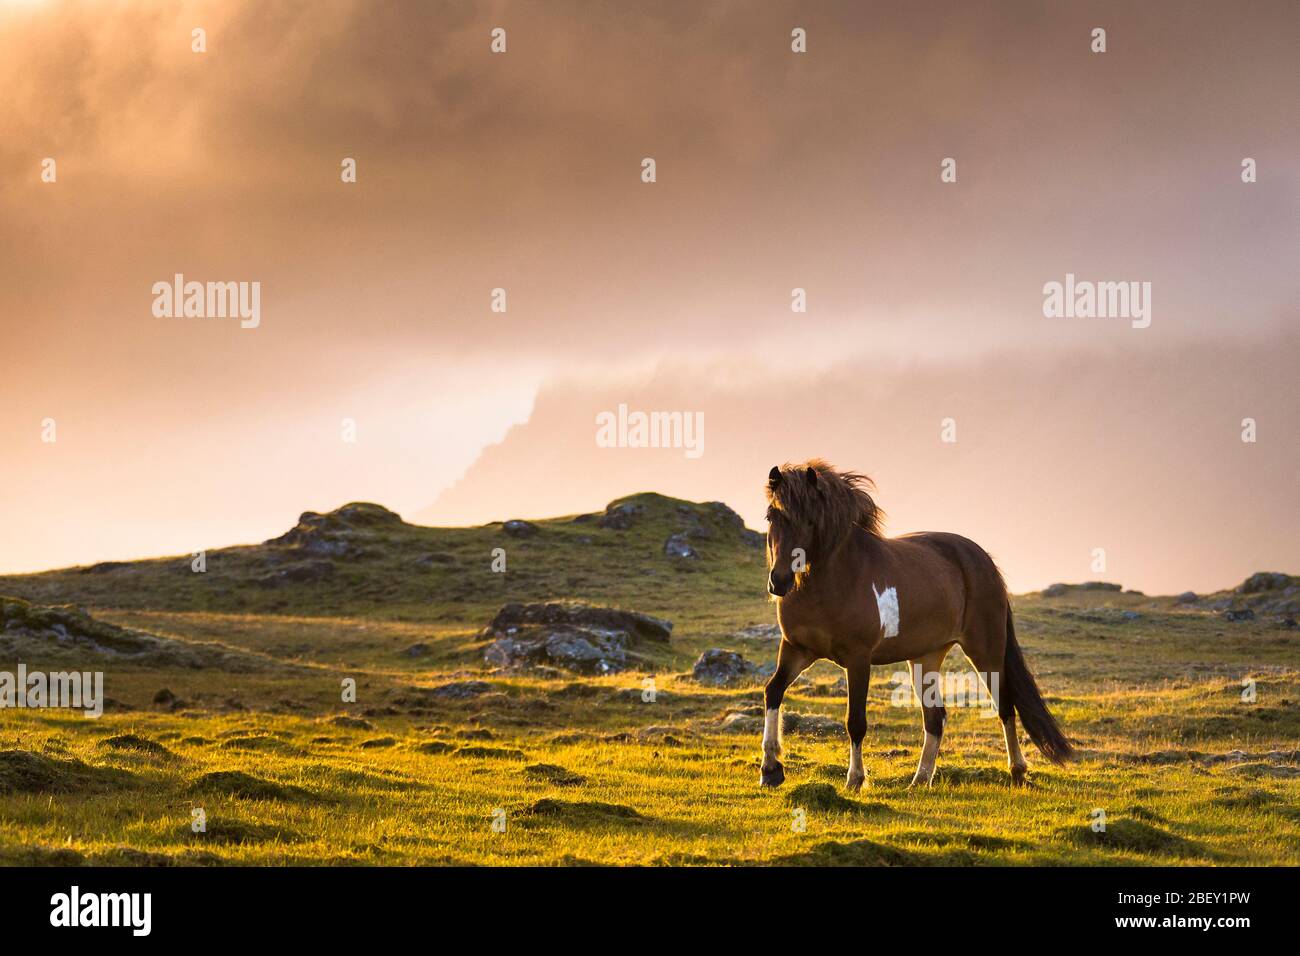 Icelandic Horse. Pinto horse walking on a meadow at sunset, Iceland Stock Photo